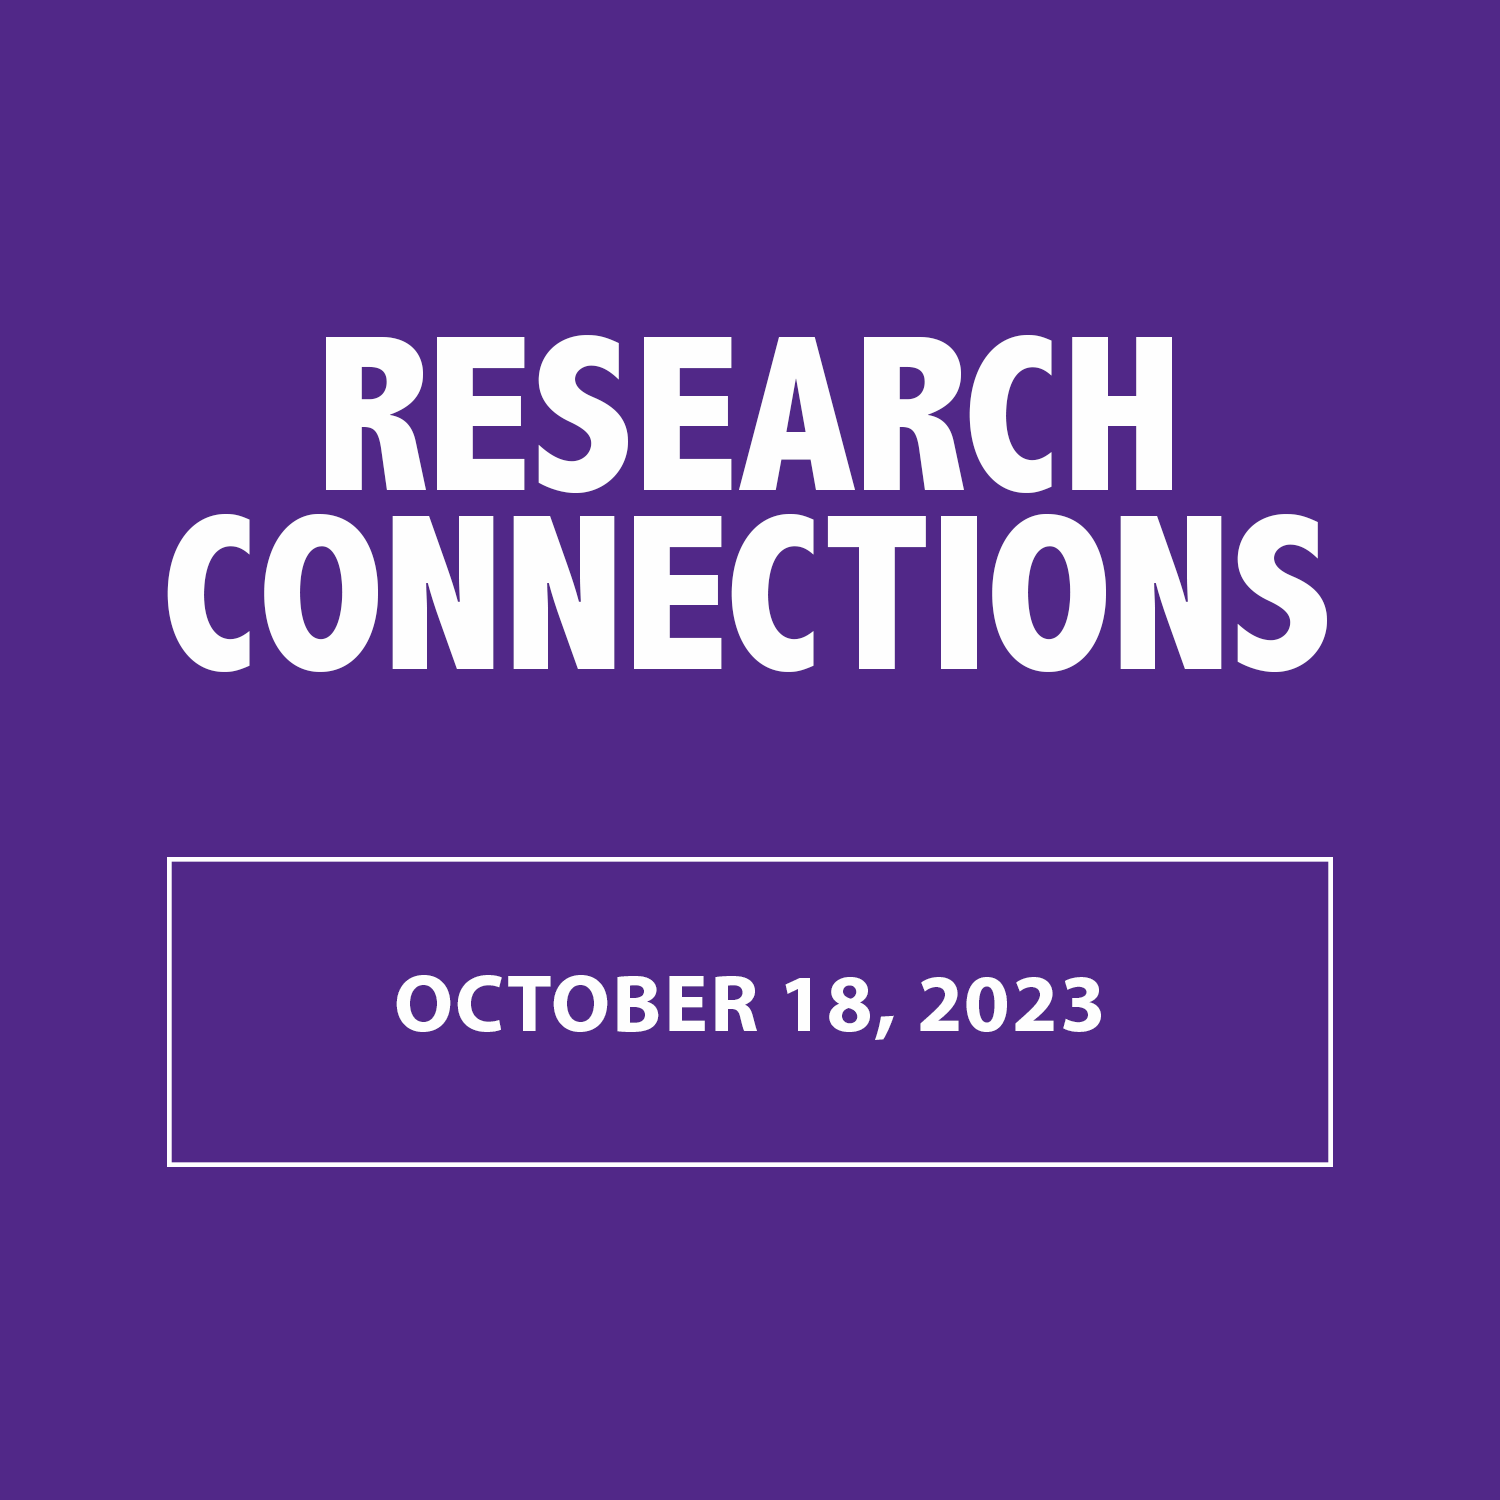 Research Connections reminder to attend